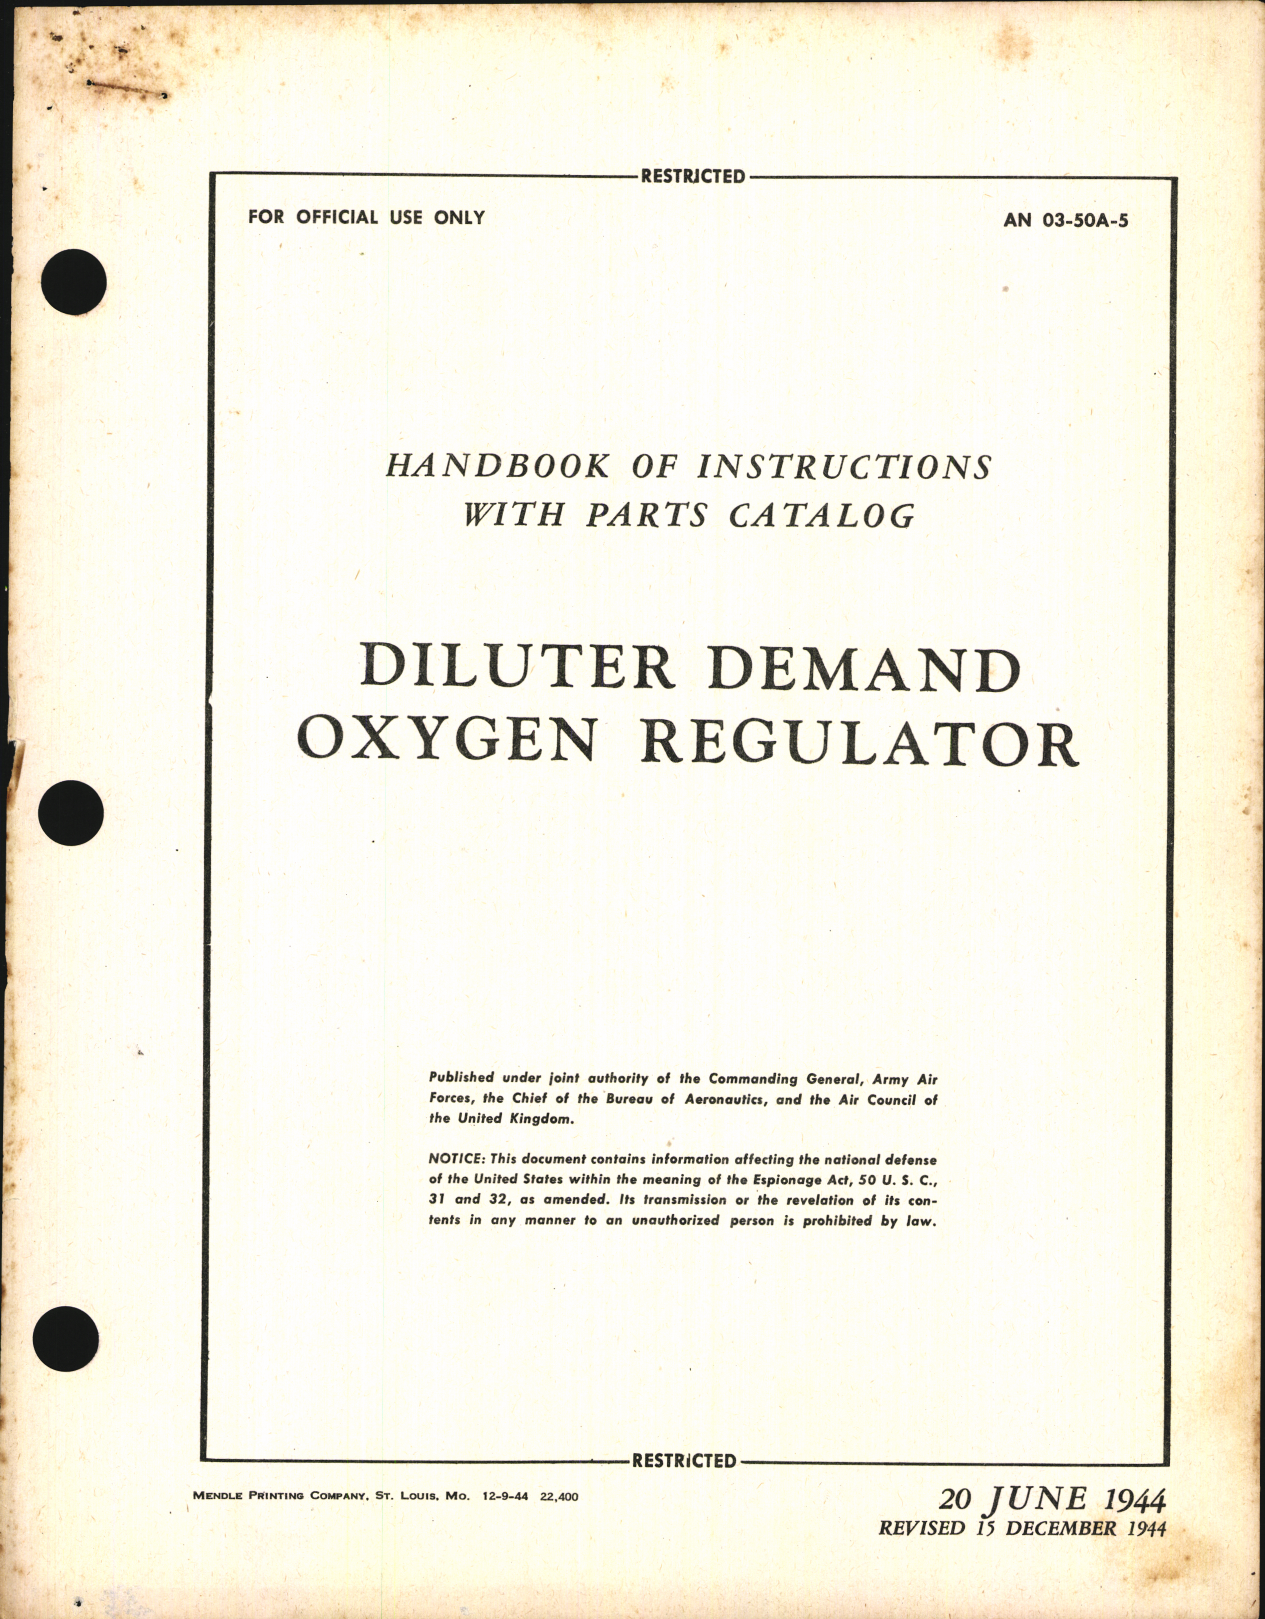 Sample page 1 from AirCorps Library document: Handbook of Instructions with Parts Catalog for Diluter Demand Oxygen Regulator